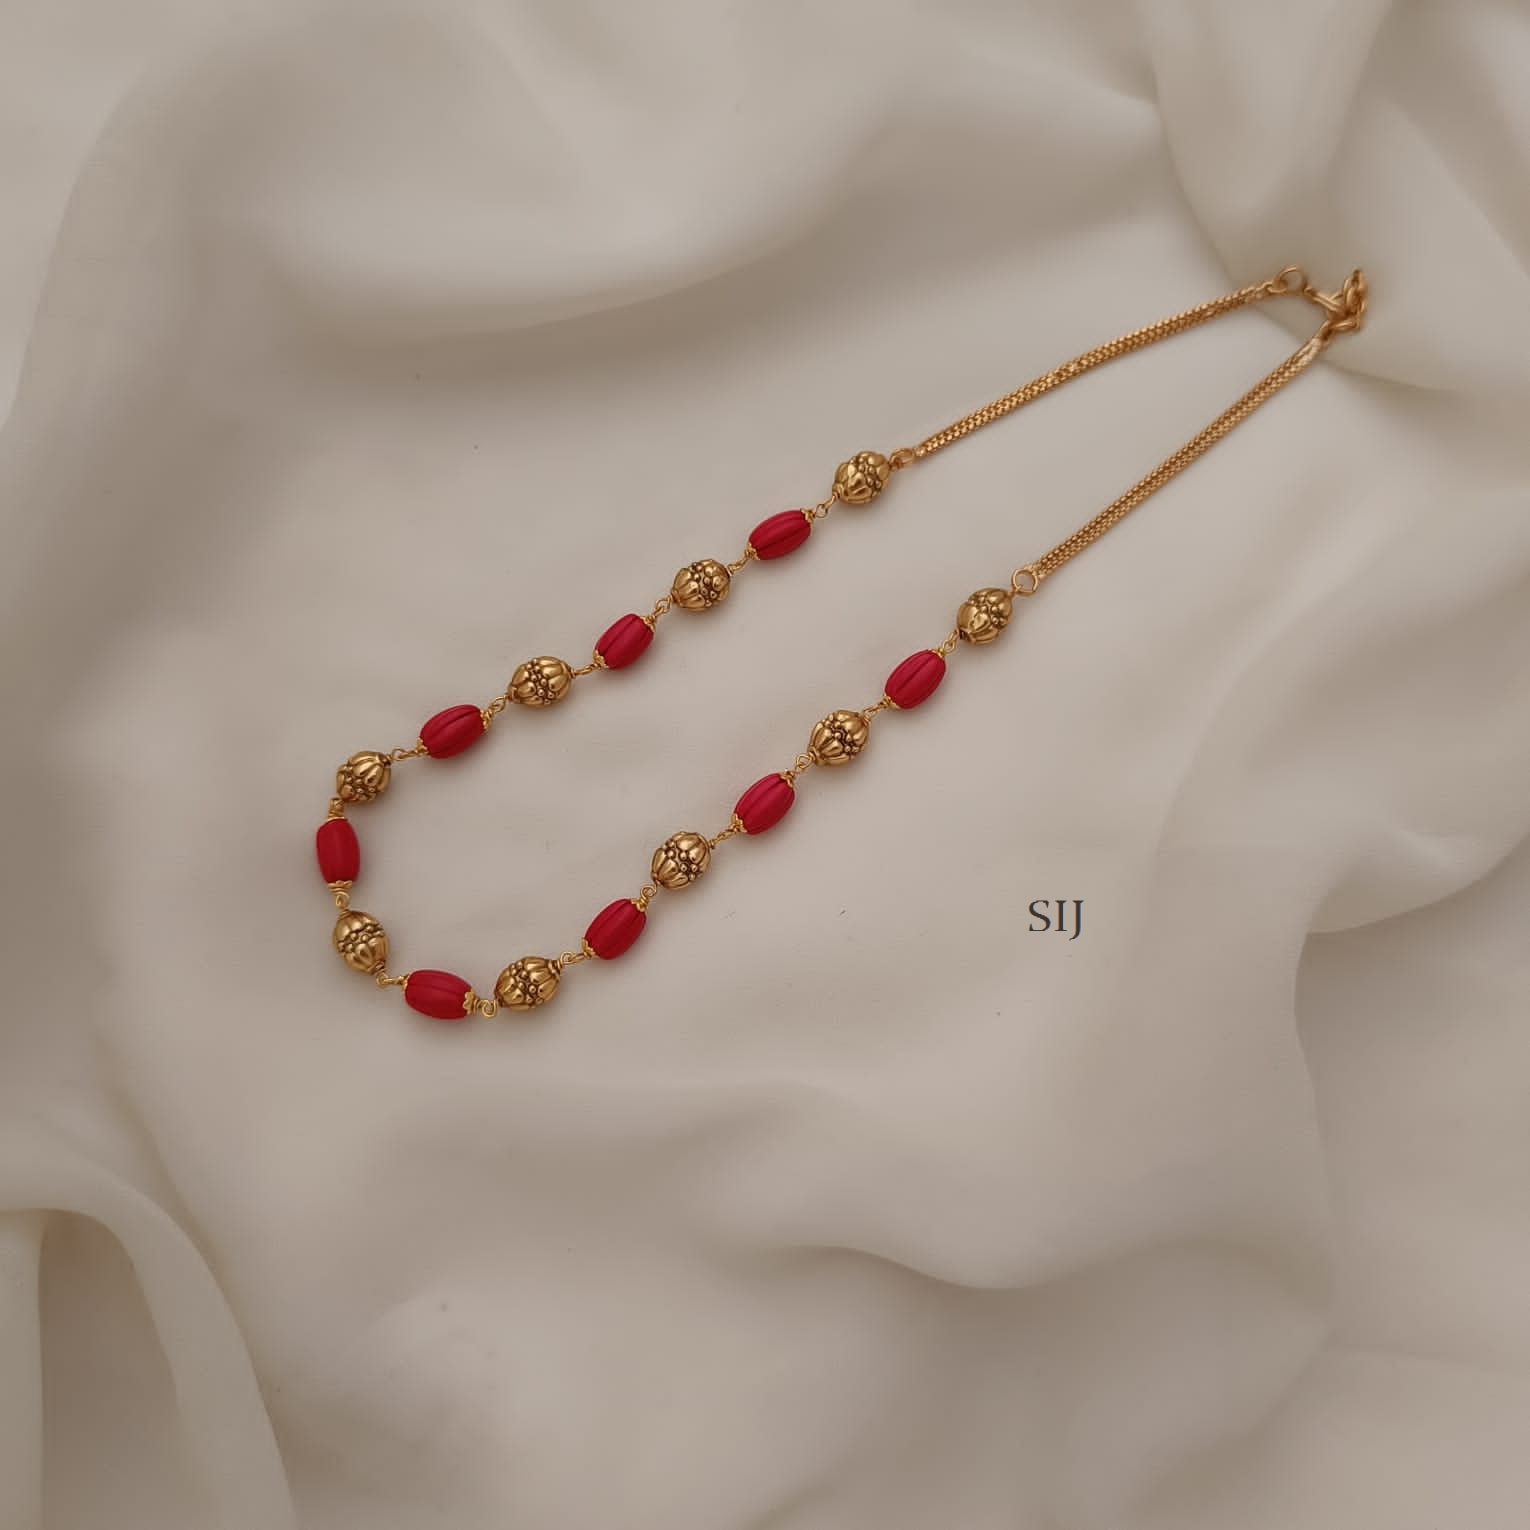 Imitation Gold And Coral Beaded Chain